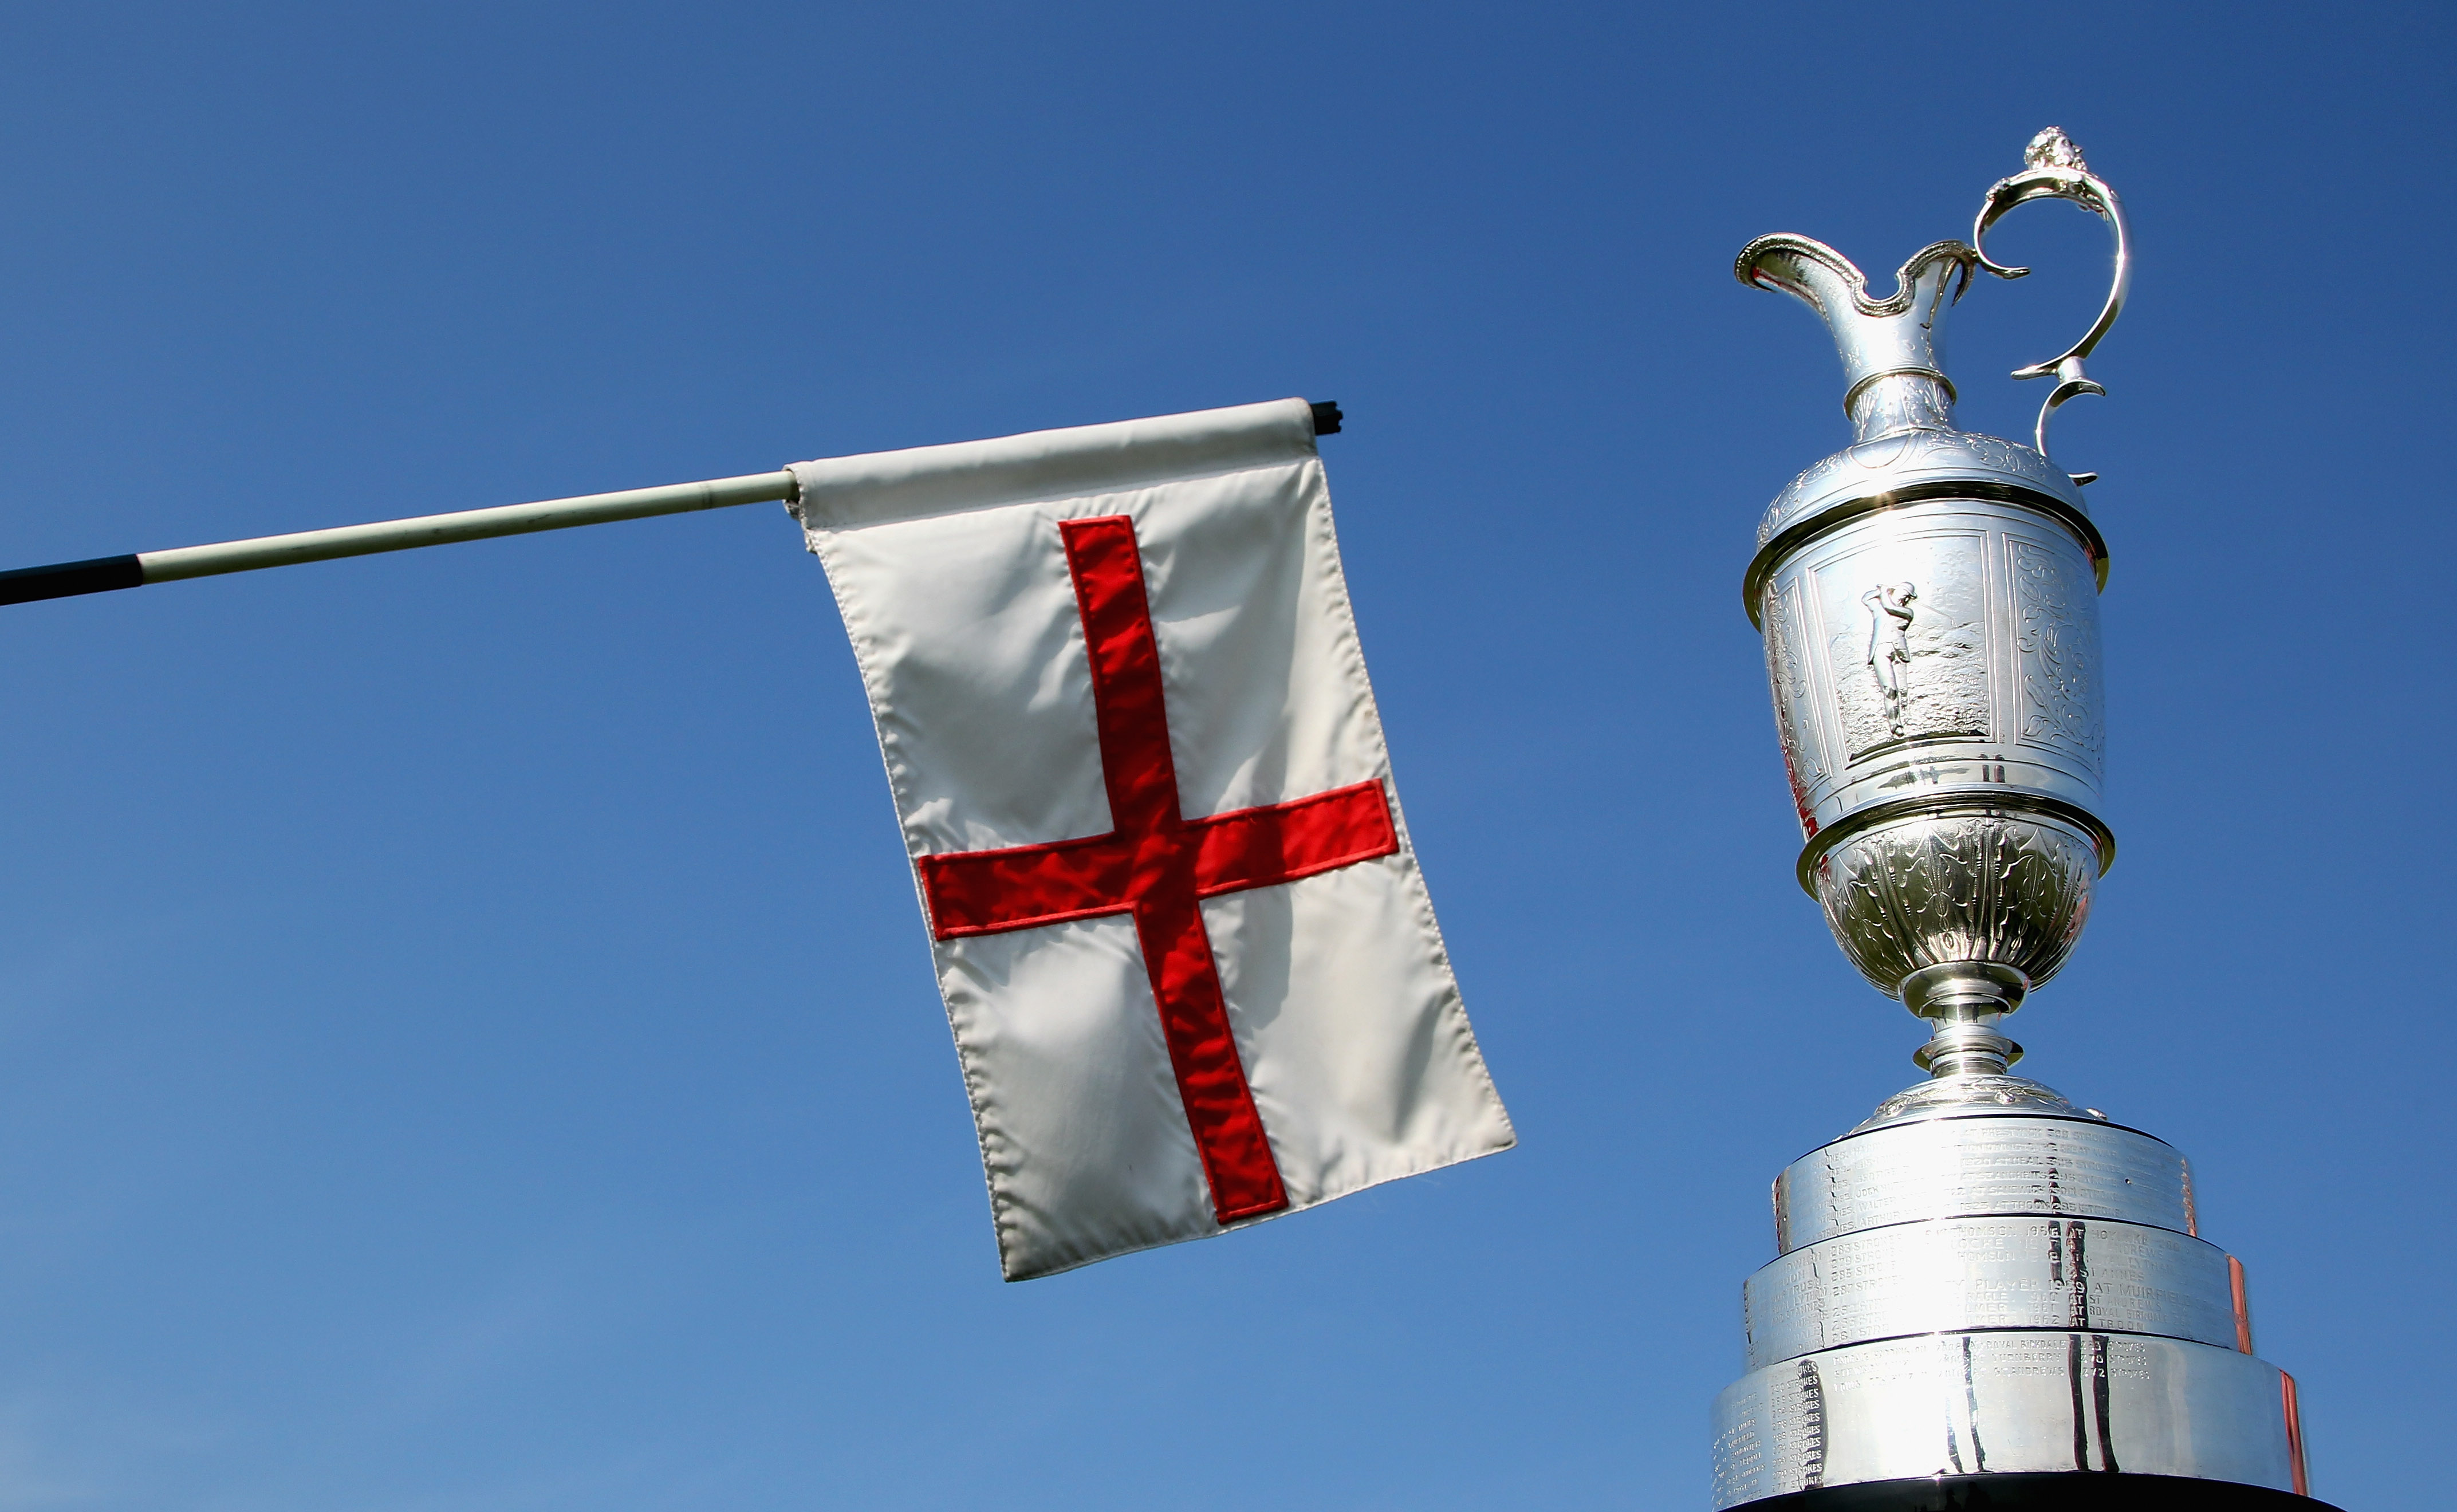 SANDWICH, ENGLAND - APRIL 19:  A general view of the claret jug and a Royal St Georges's pin flag prior to The Royal St George's Open Championship press conference on April 19, 2011 in Sandwich, England.  (Photo by Andrew Redington/Getty Images)